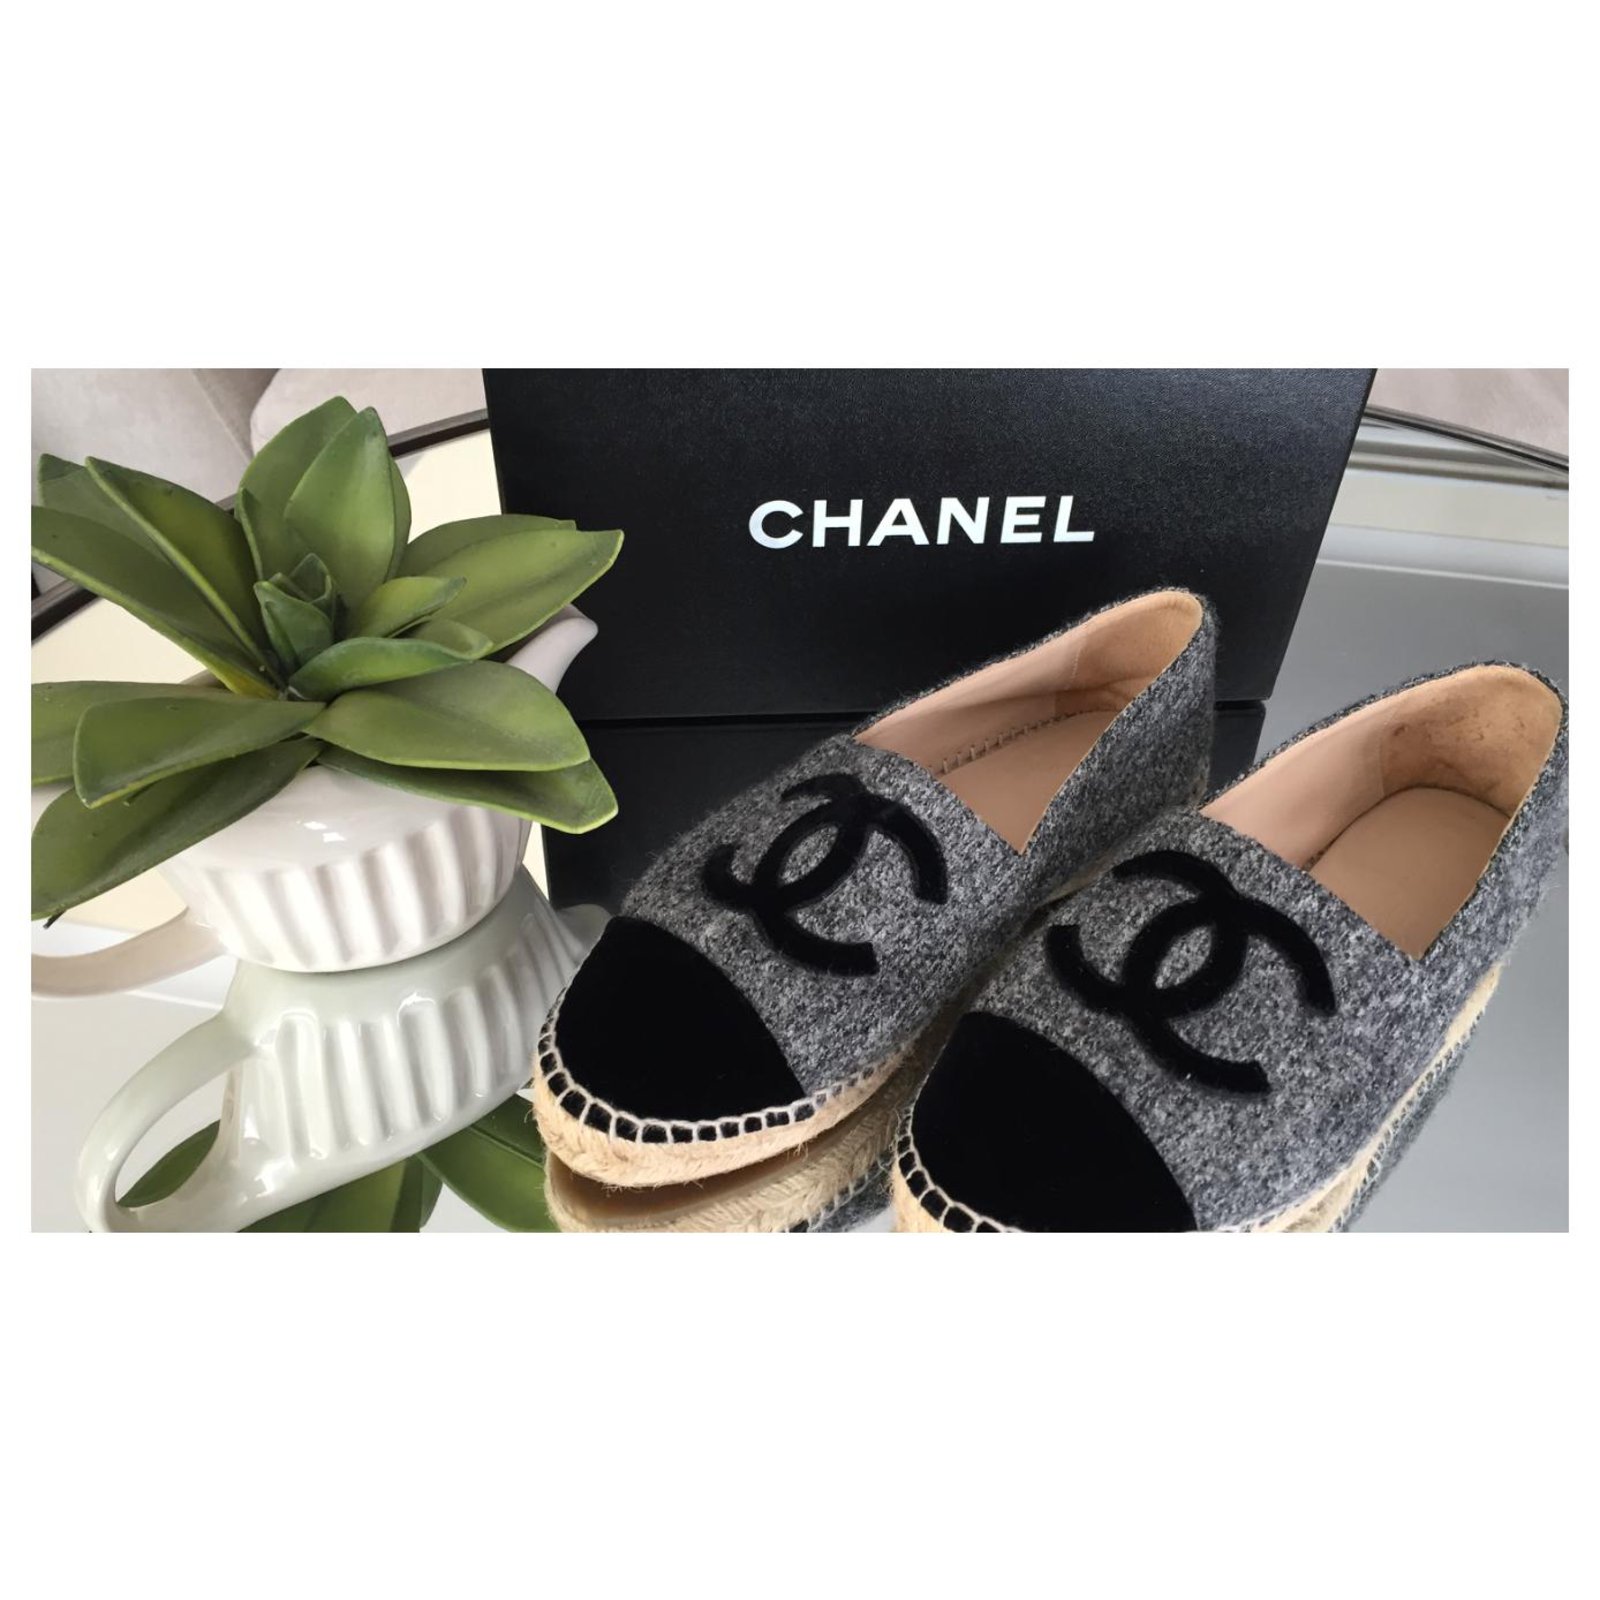 Chanel Chanel Tweed & Velvet Espadrilles Size Eur 39 Cruise Collection ...